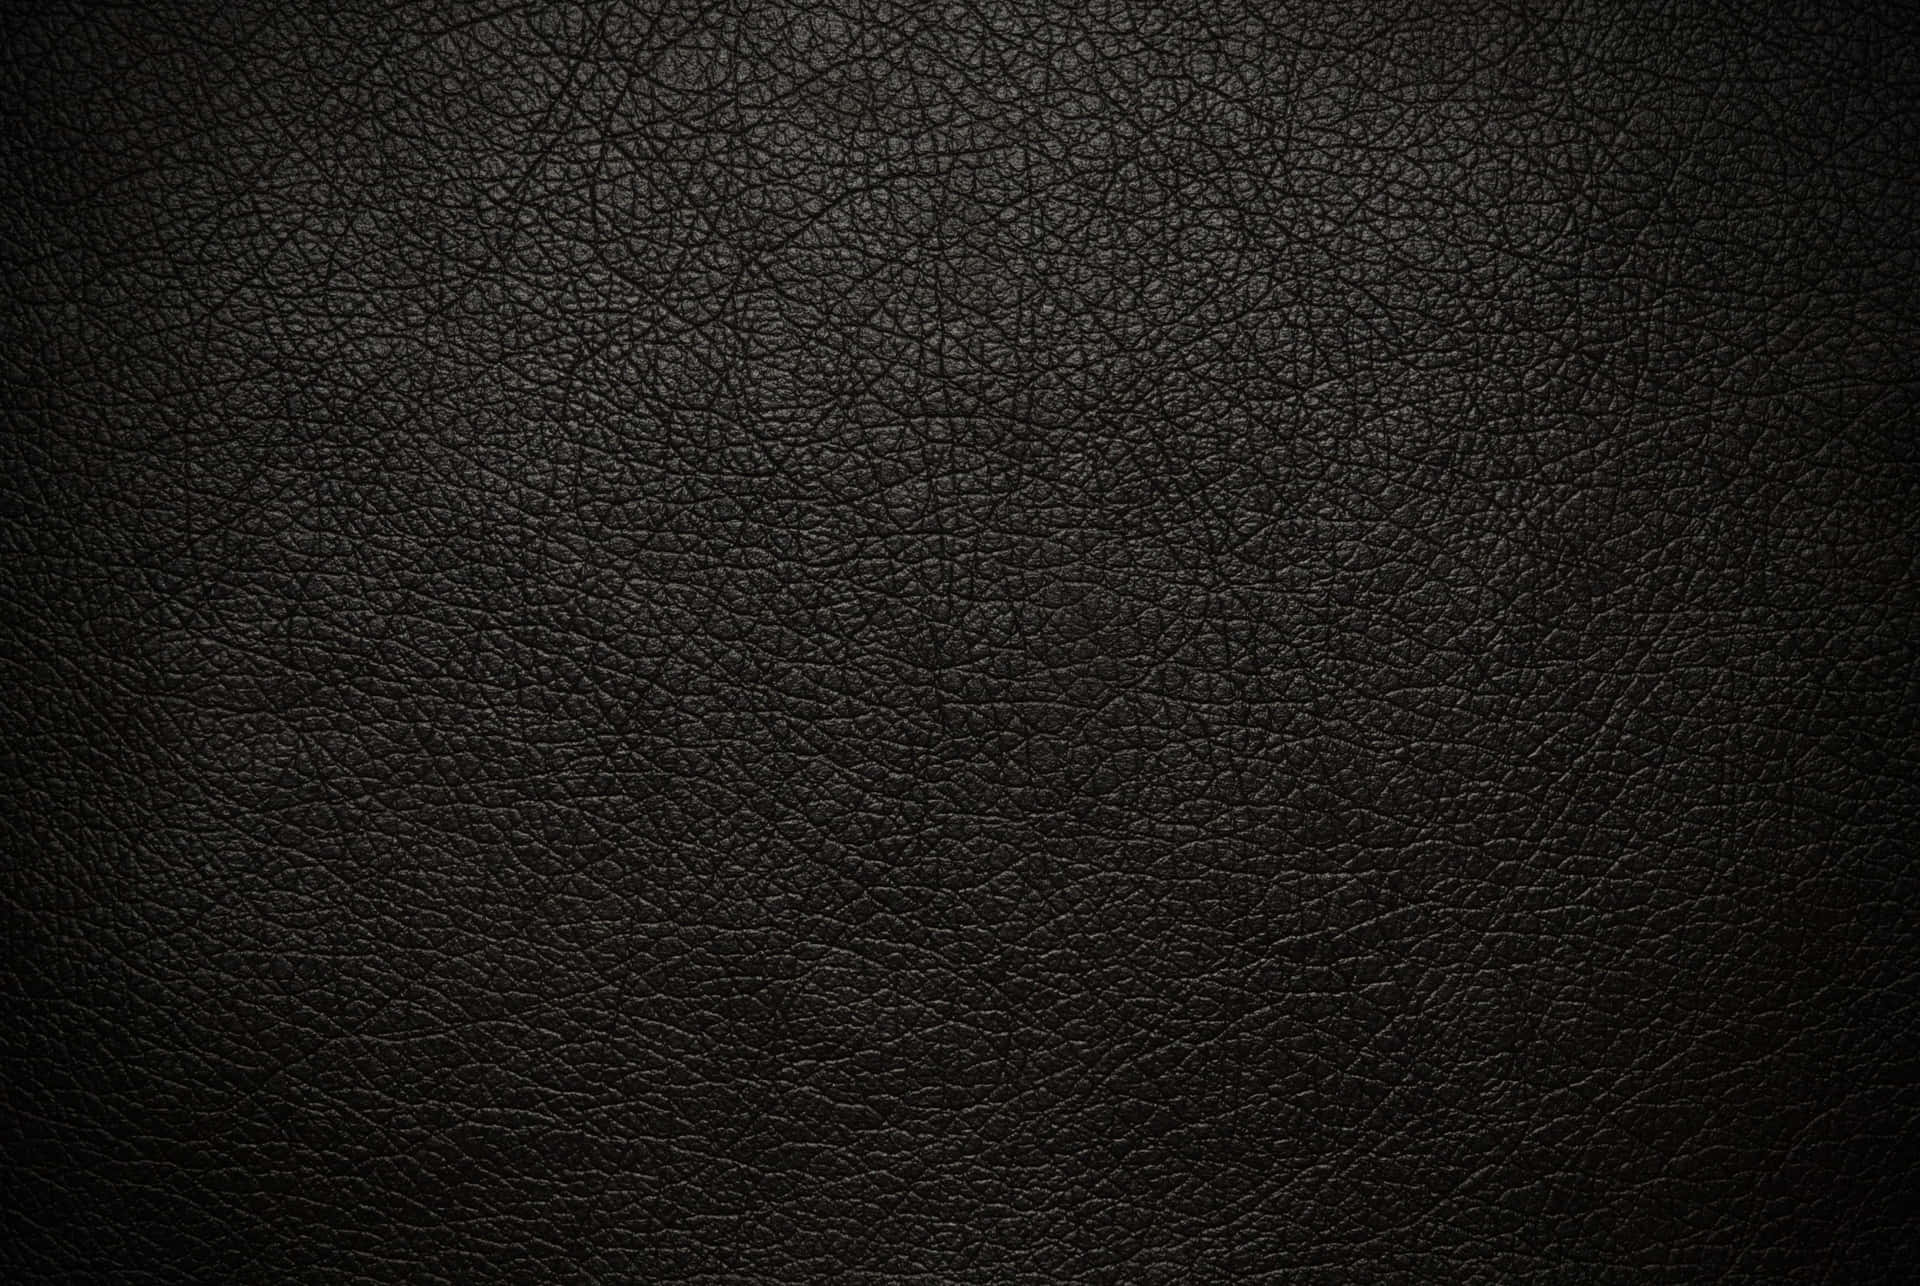 Black Leather Texture Background